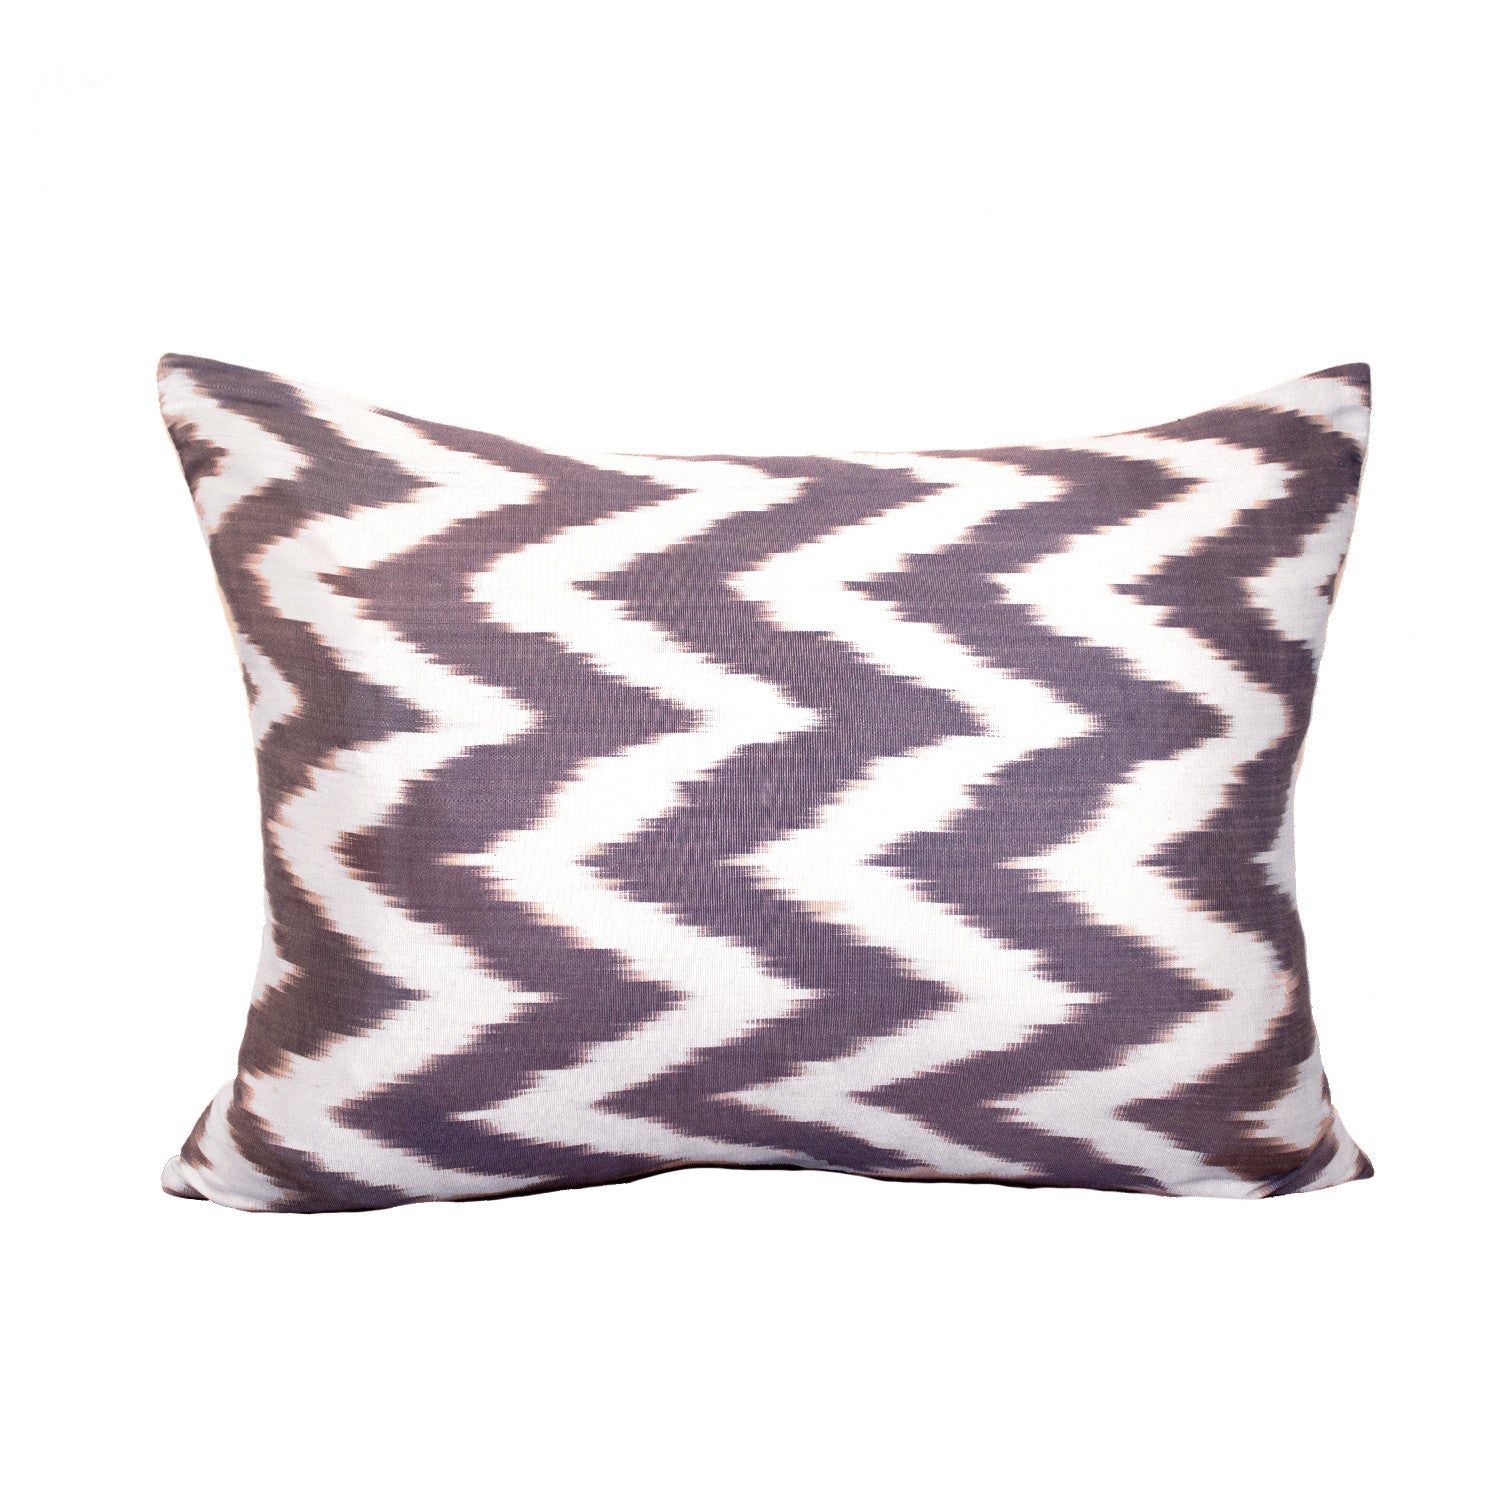 Grey Ikat pillow is graphic, striking and polished.